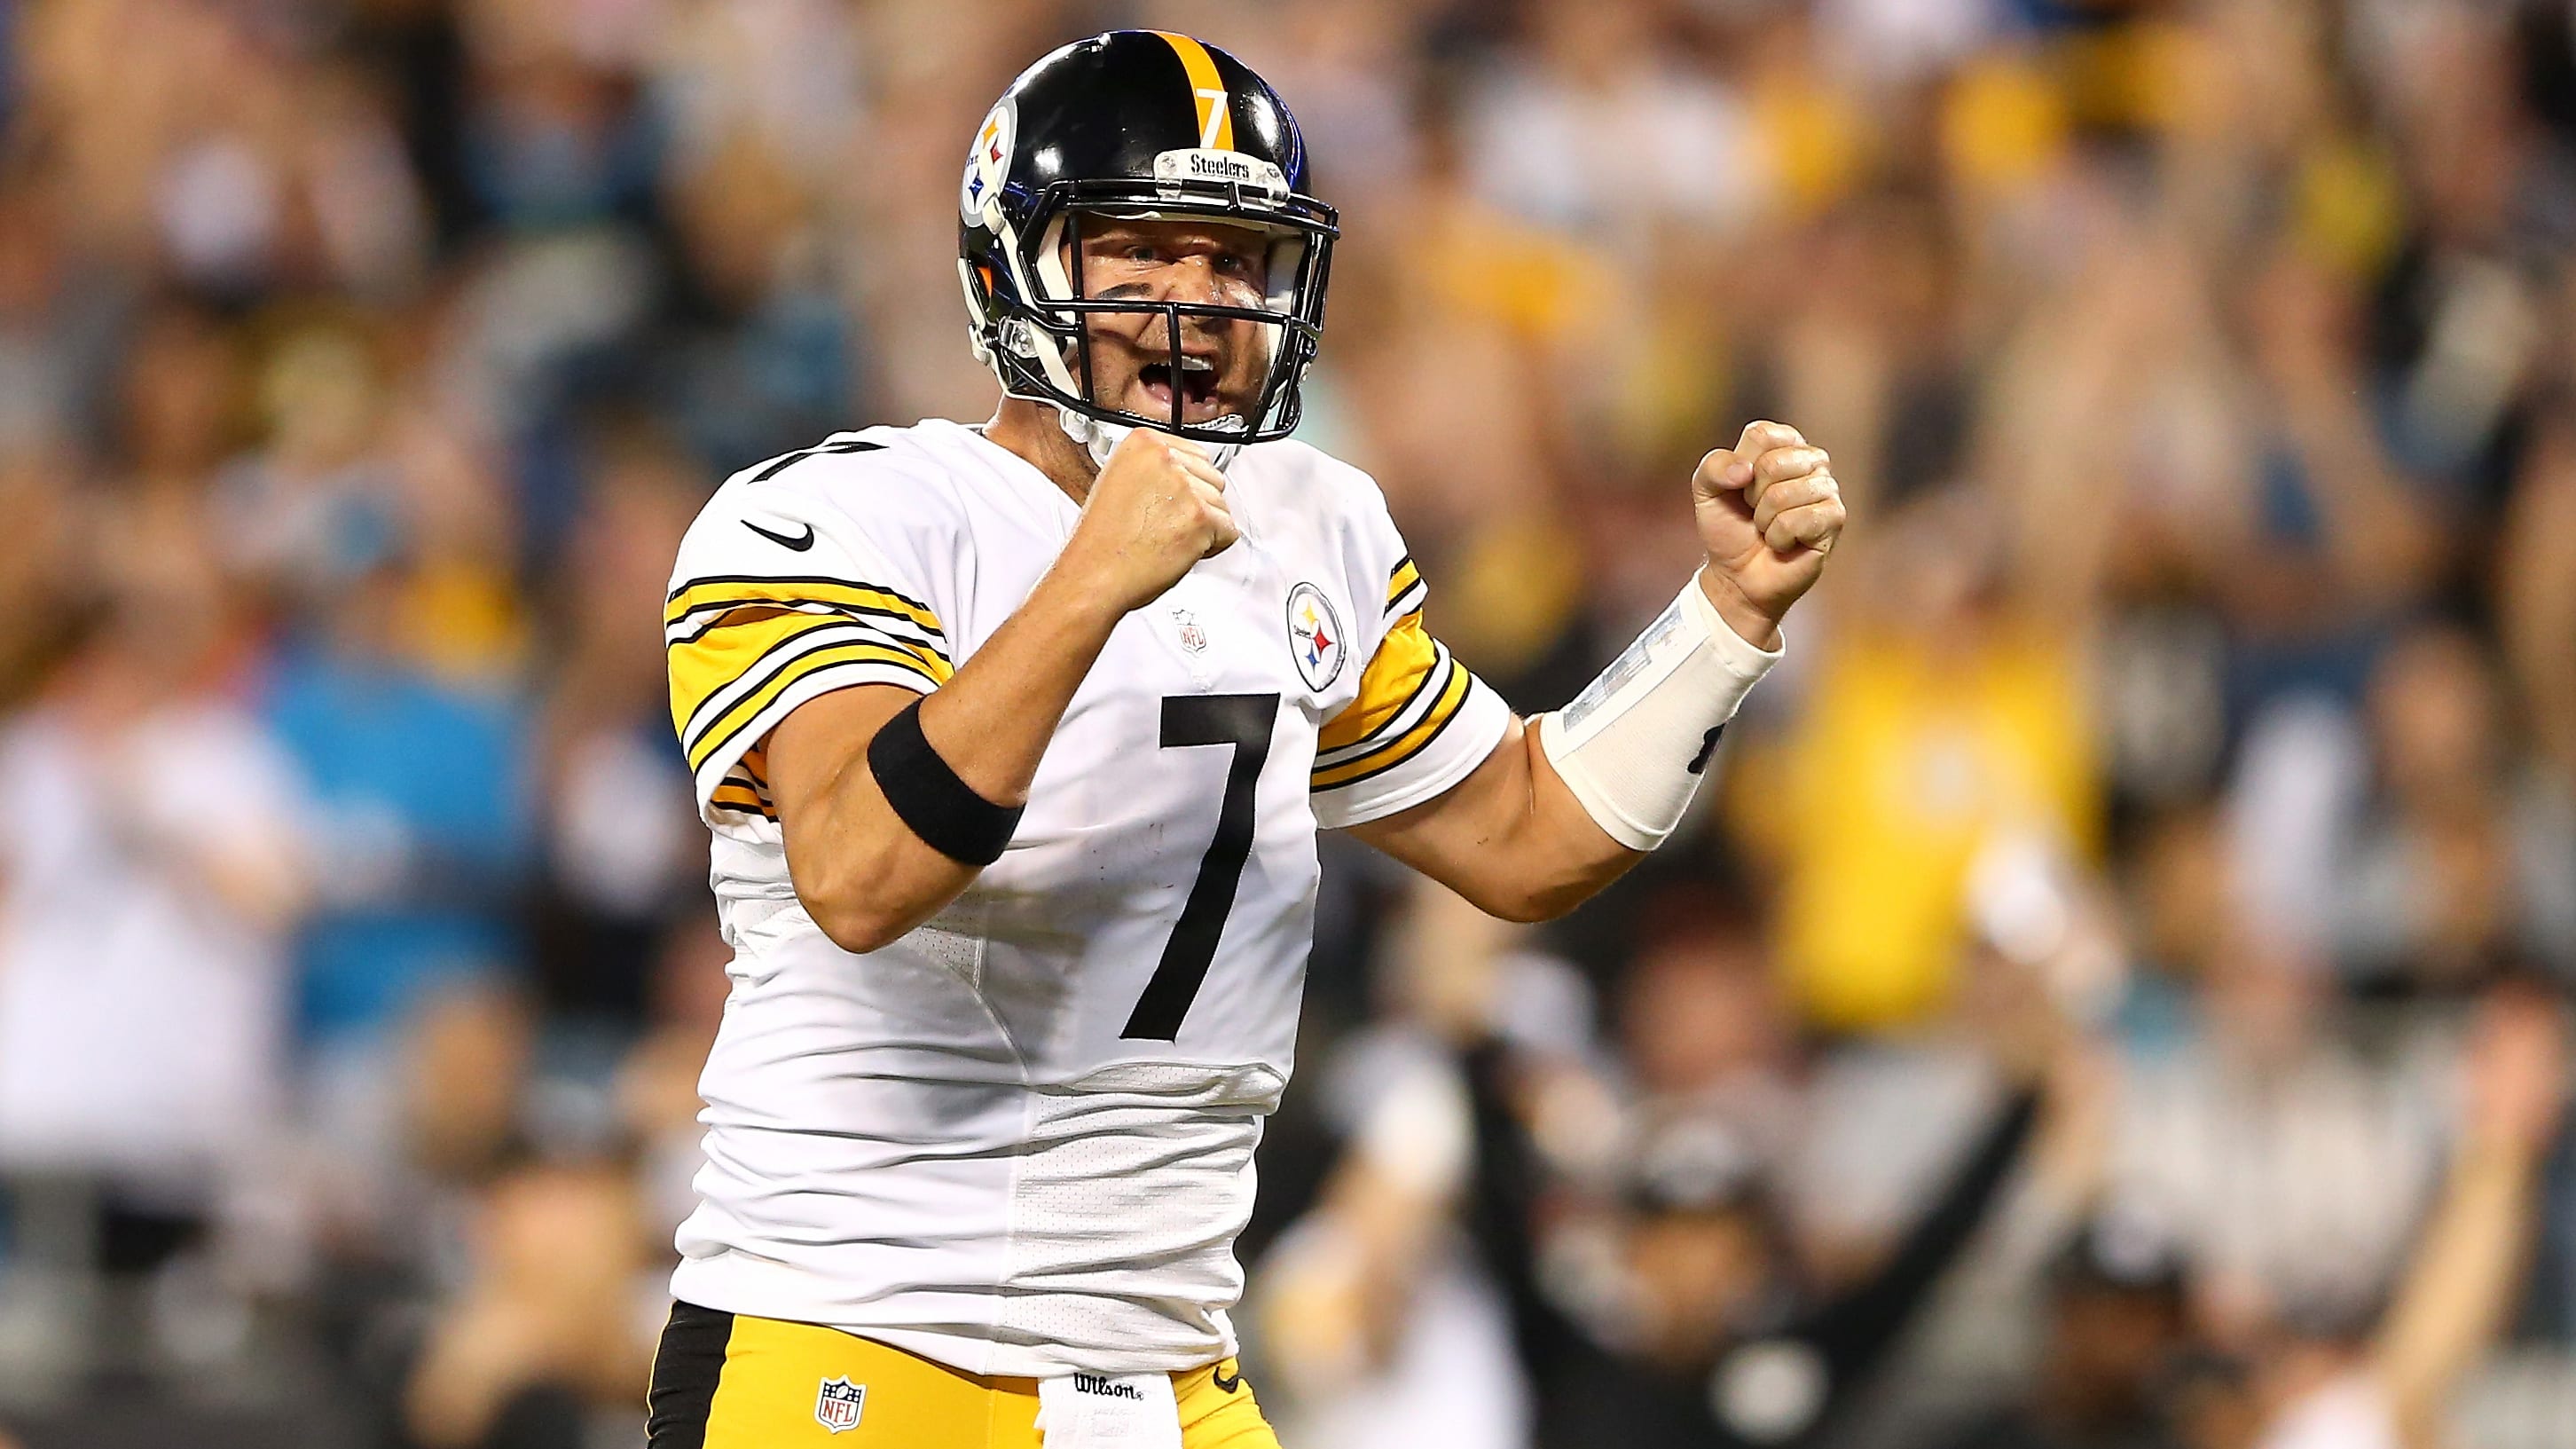 Ben Roethlisberger Career Stats, Earnings, Hall of Fame Chances, Super Bowl Record and Facts